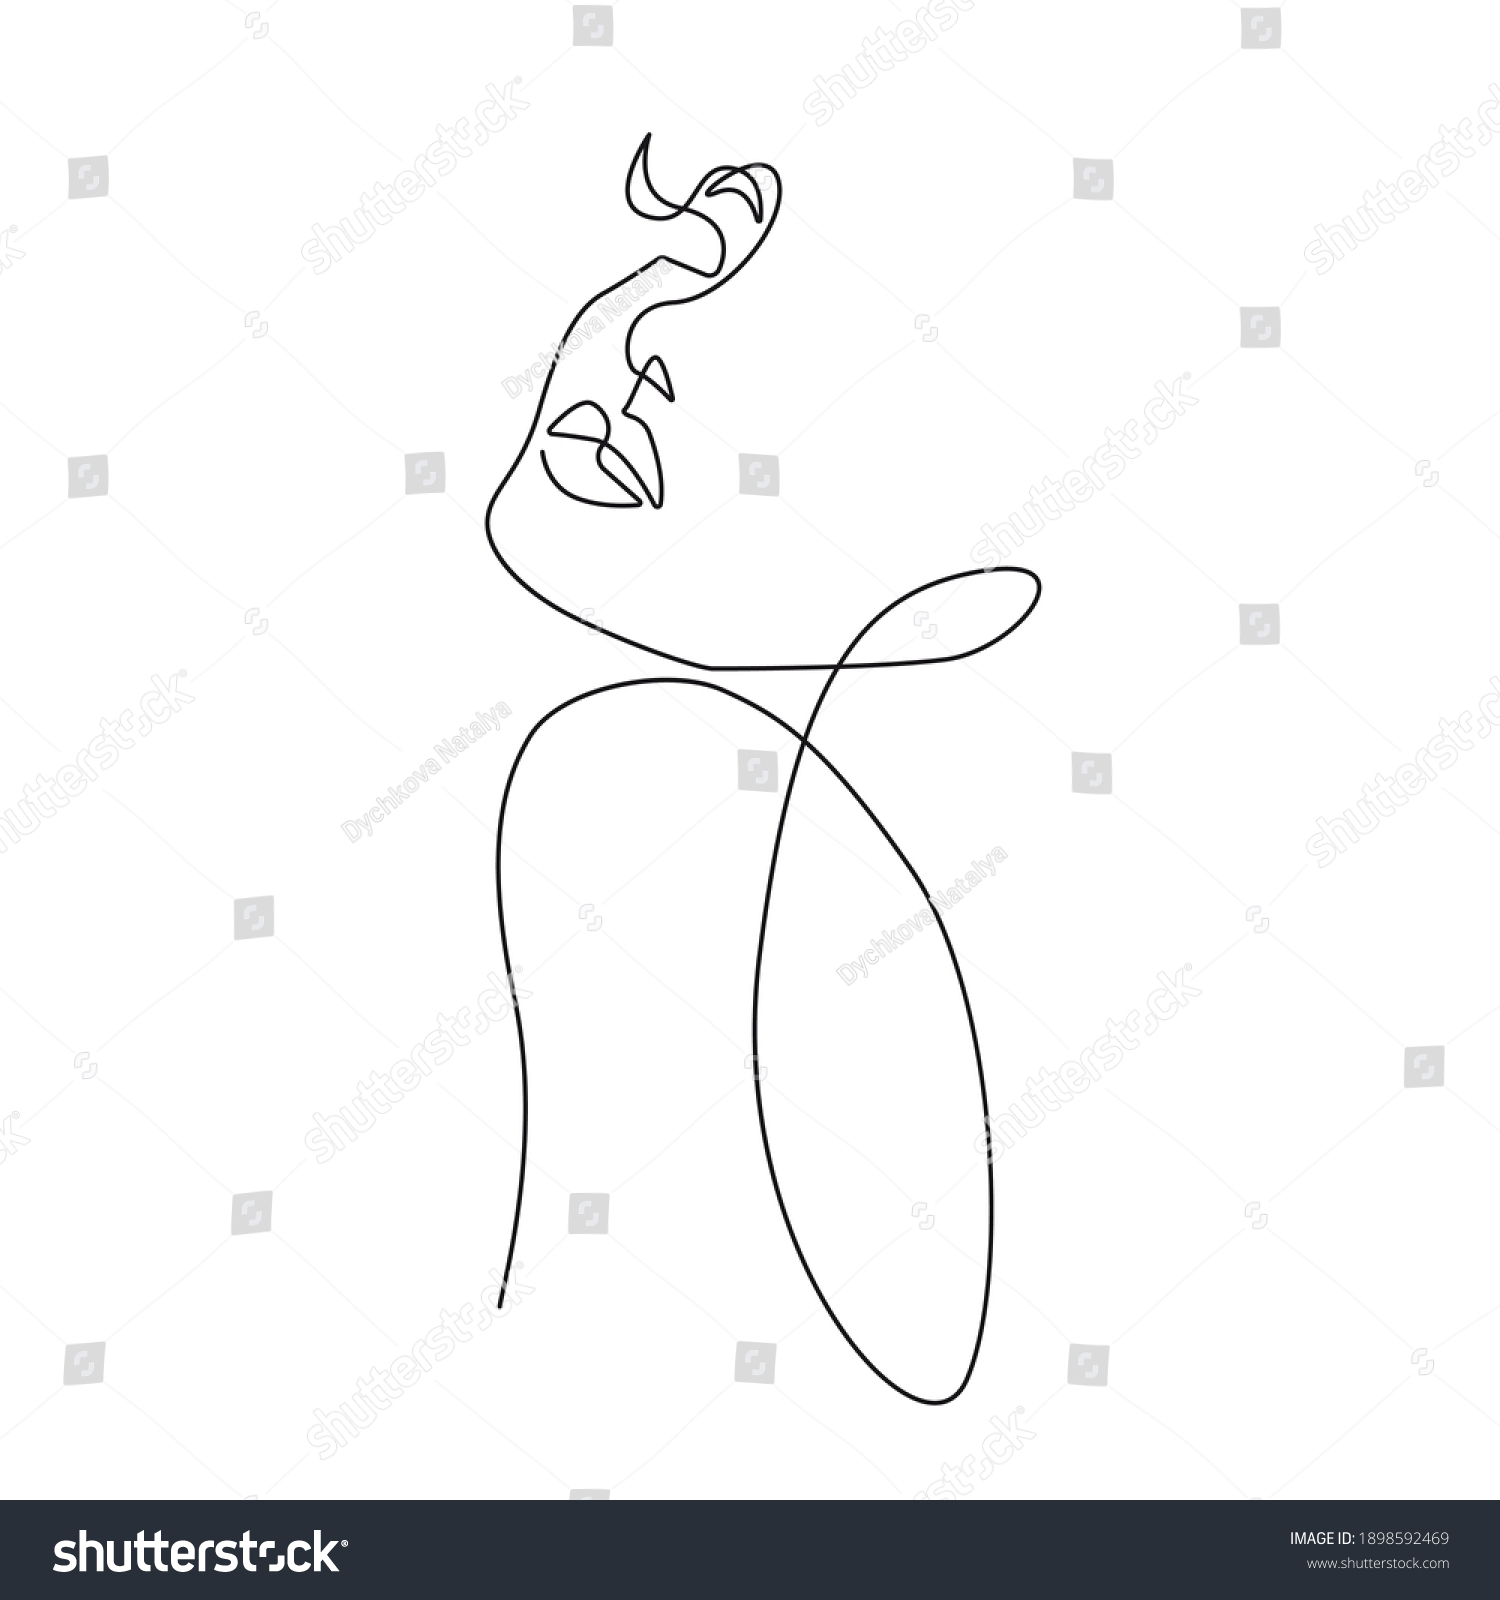 Elegant One Line Sketches of Woman Abstract Face. Female Face Drawing Minimalist Line Style. Trendy Illustration for Cosmetics. Continuous Line Art. Fashion Minimal Print. Beauty Logo. Vector #1898592469